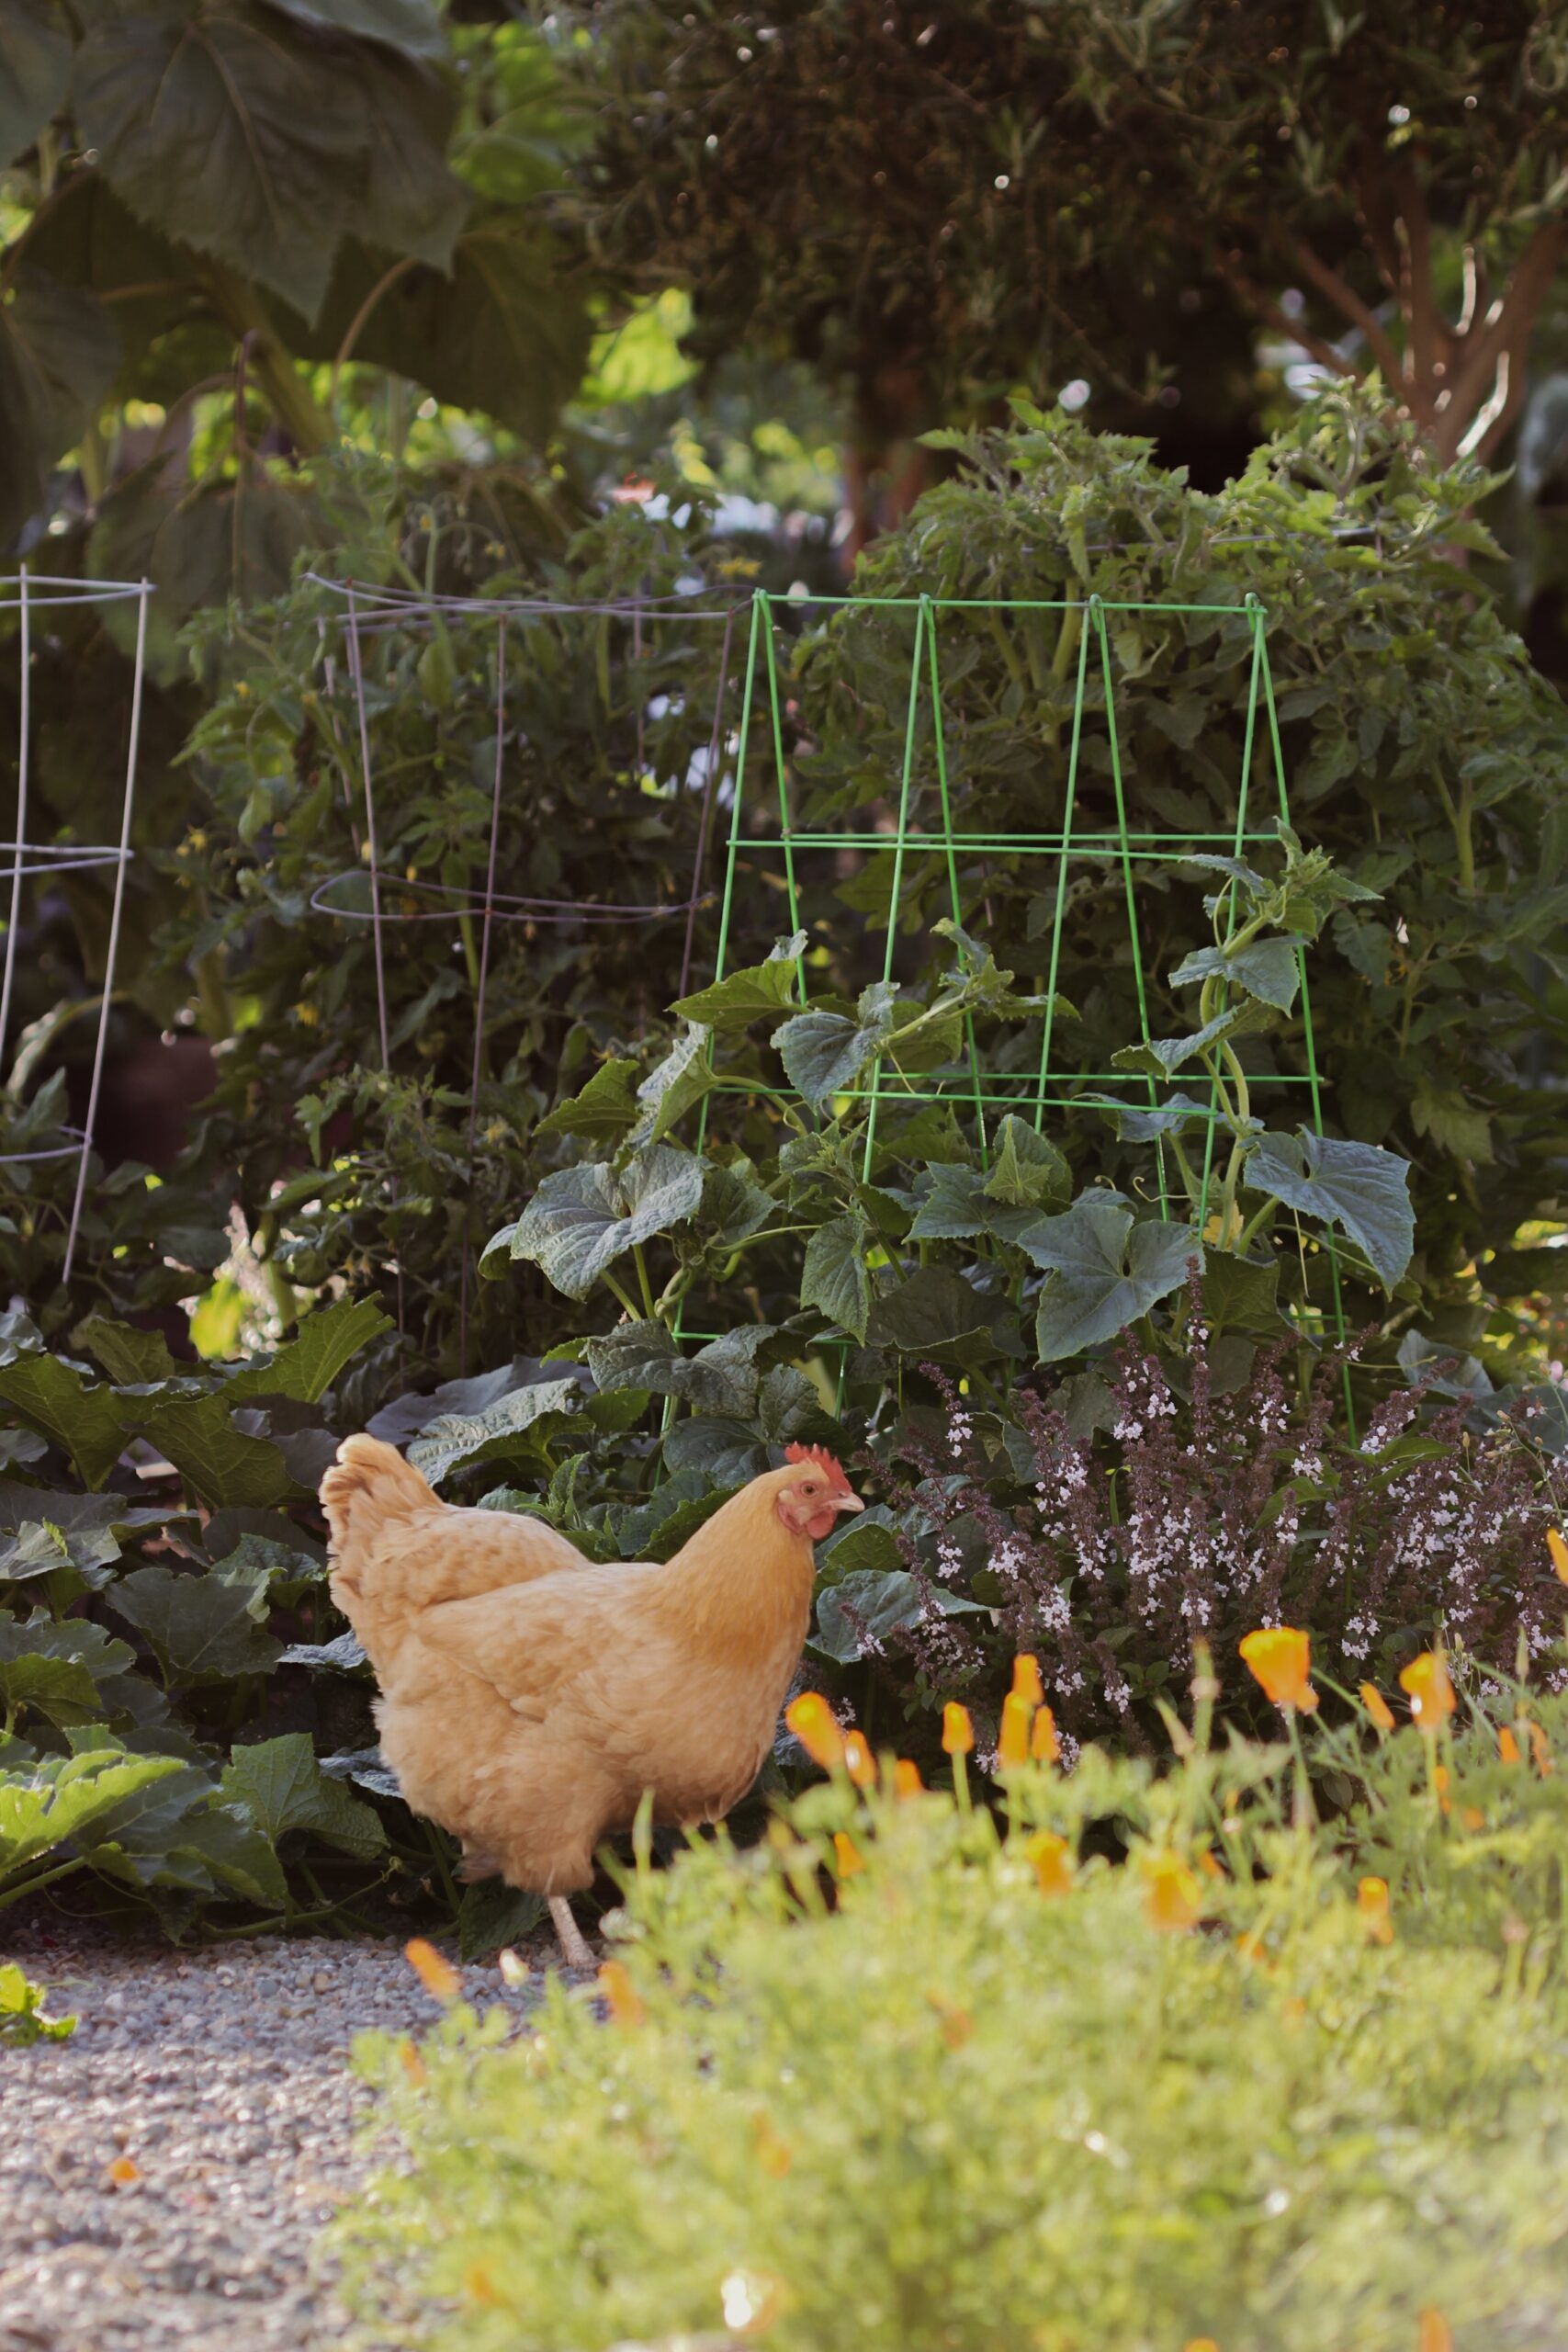 Chris and Kendra’s backyard chickens are frequent visitors in the front yard where they play around the trellis